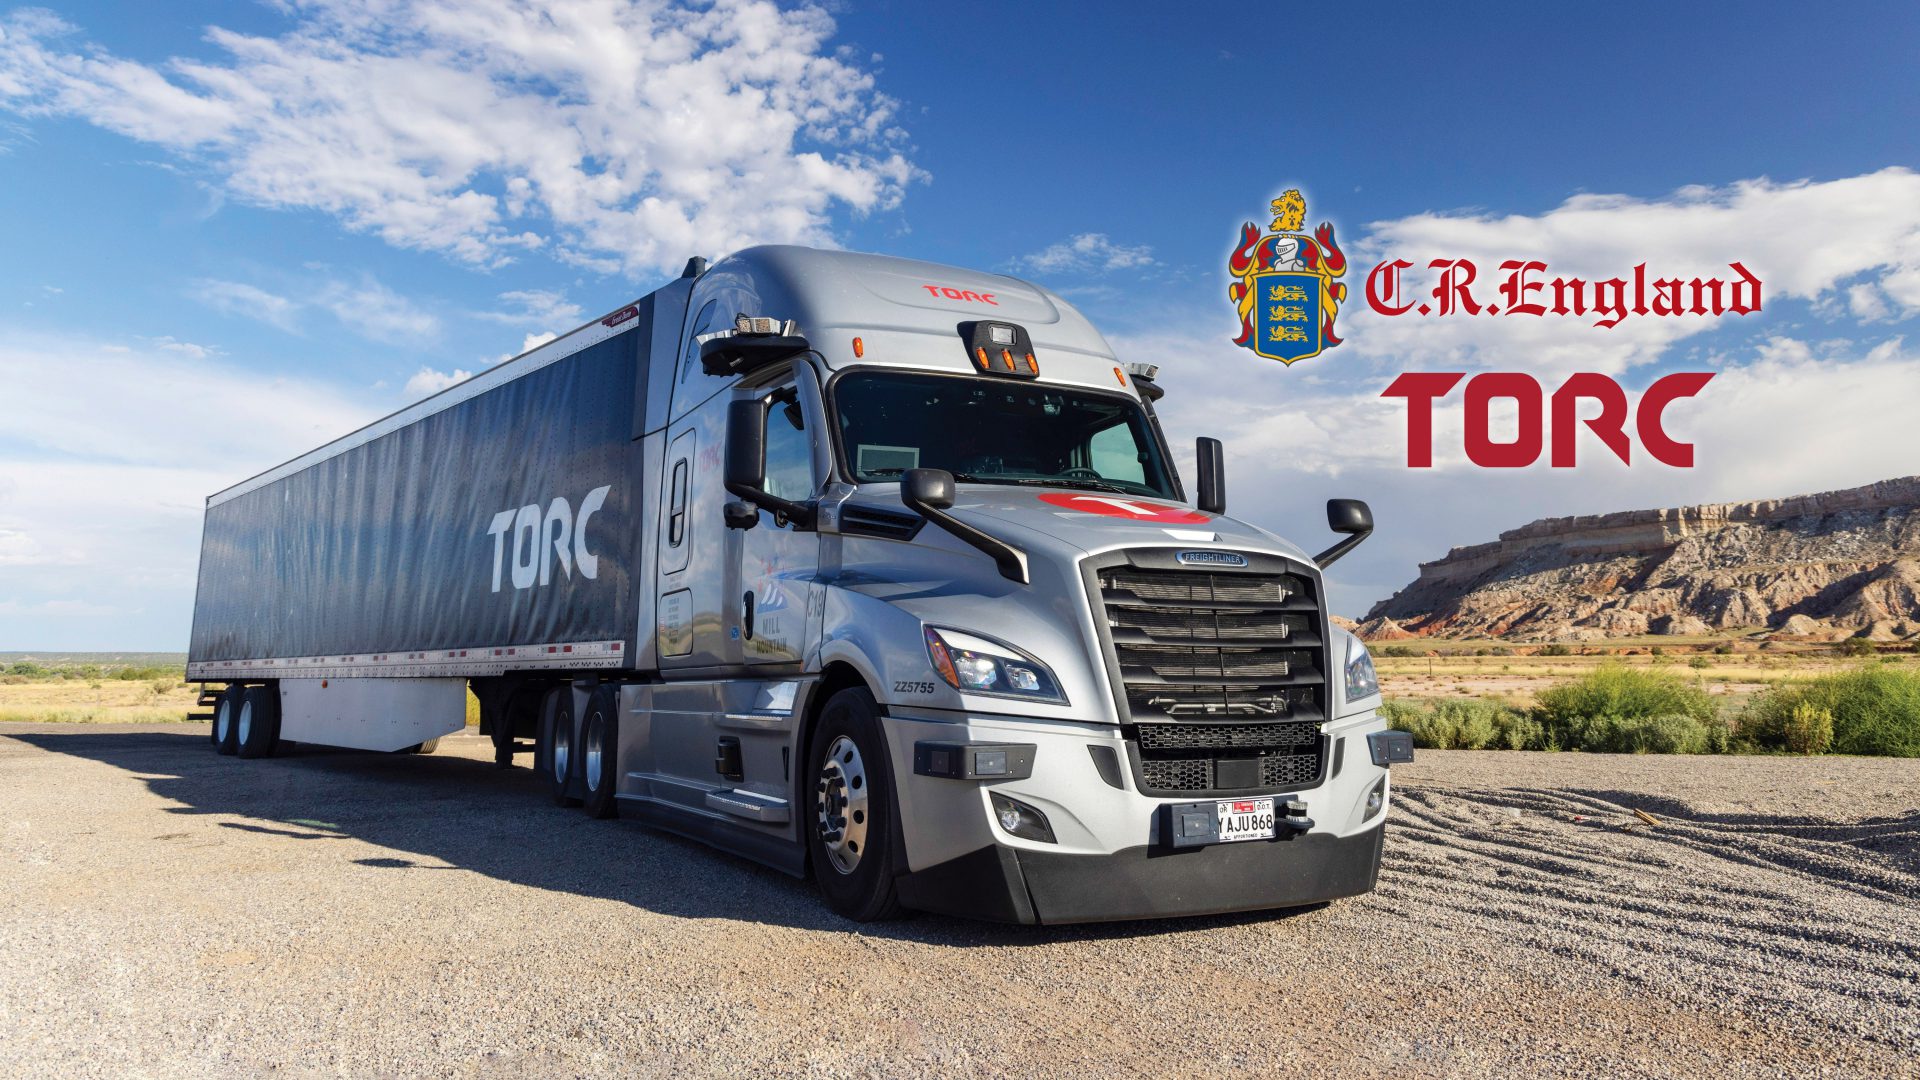 Torc Robotics Will Put Autonomous Trucks On The Road For Testing In The